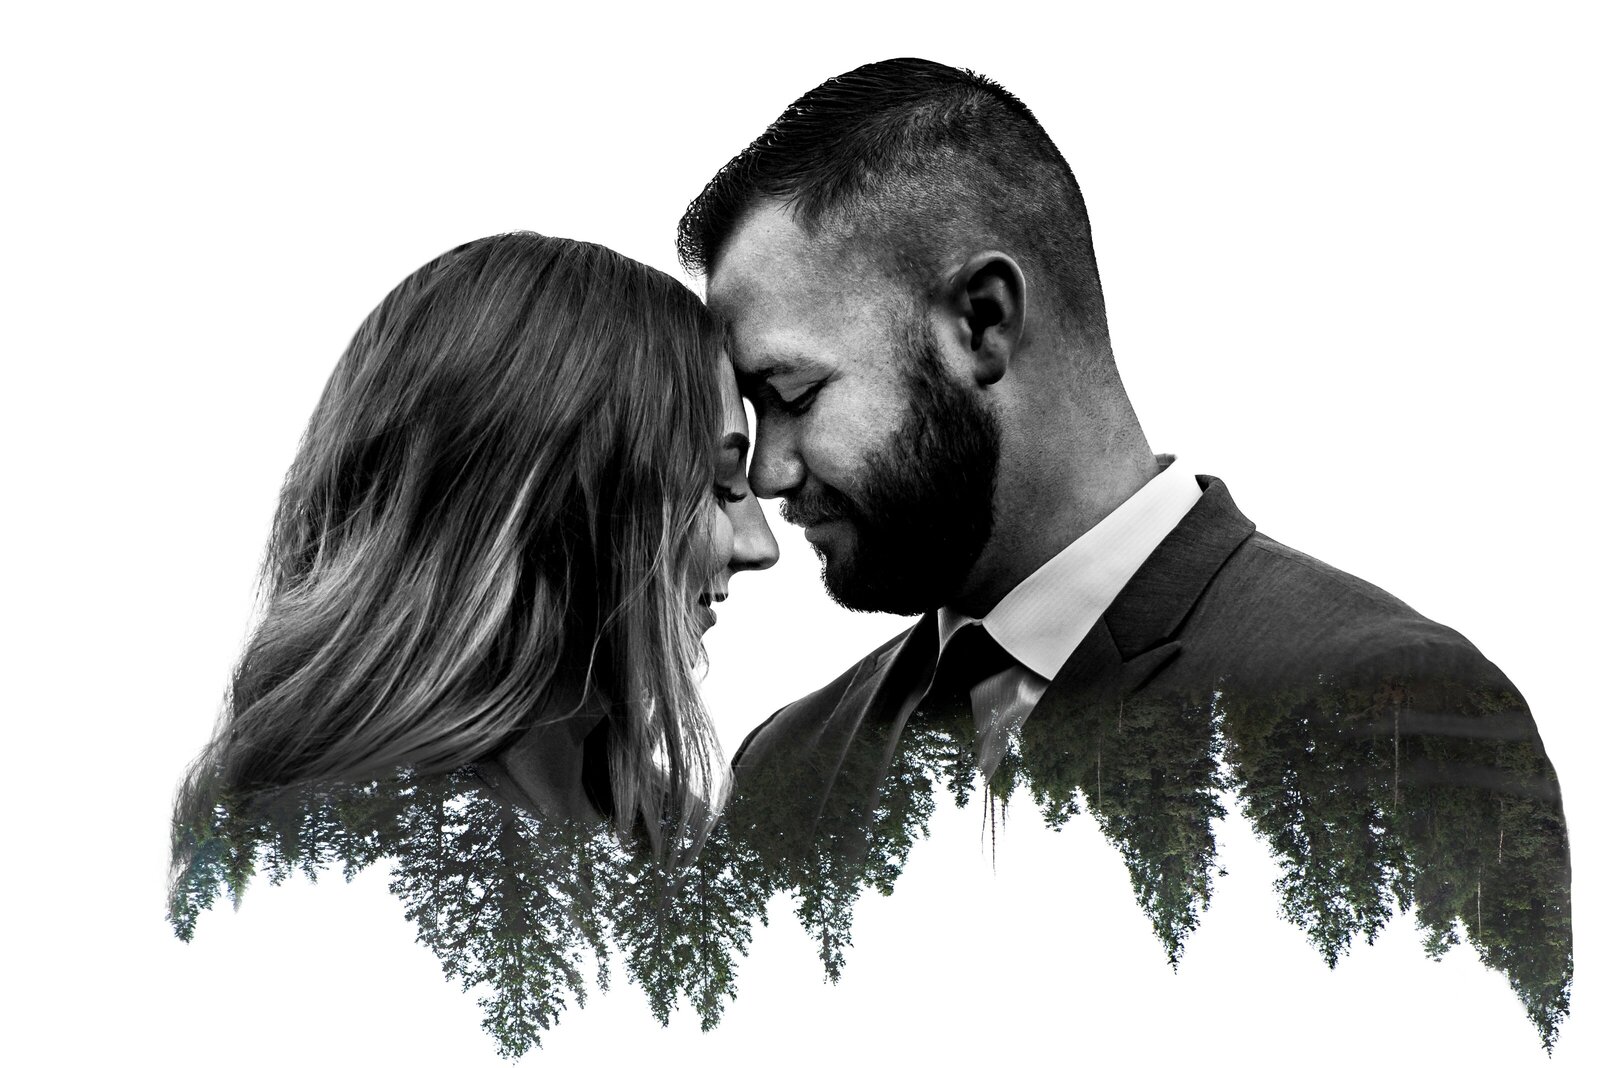 Double exposure of couple with pine trees.